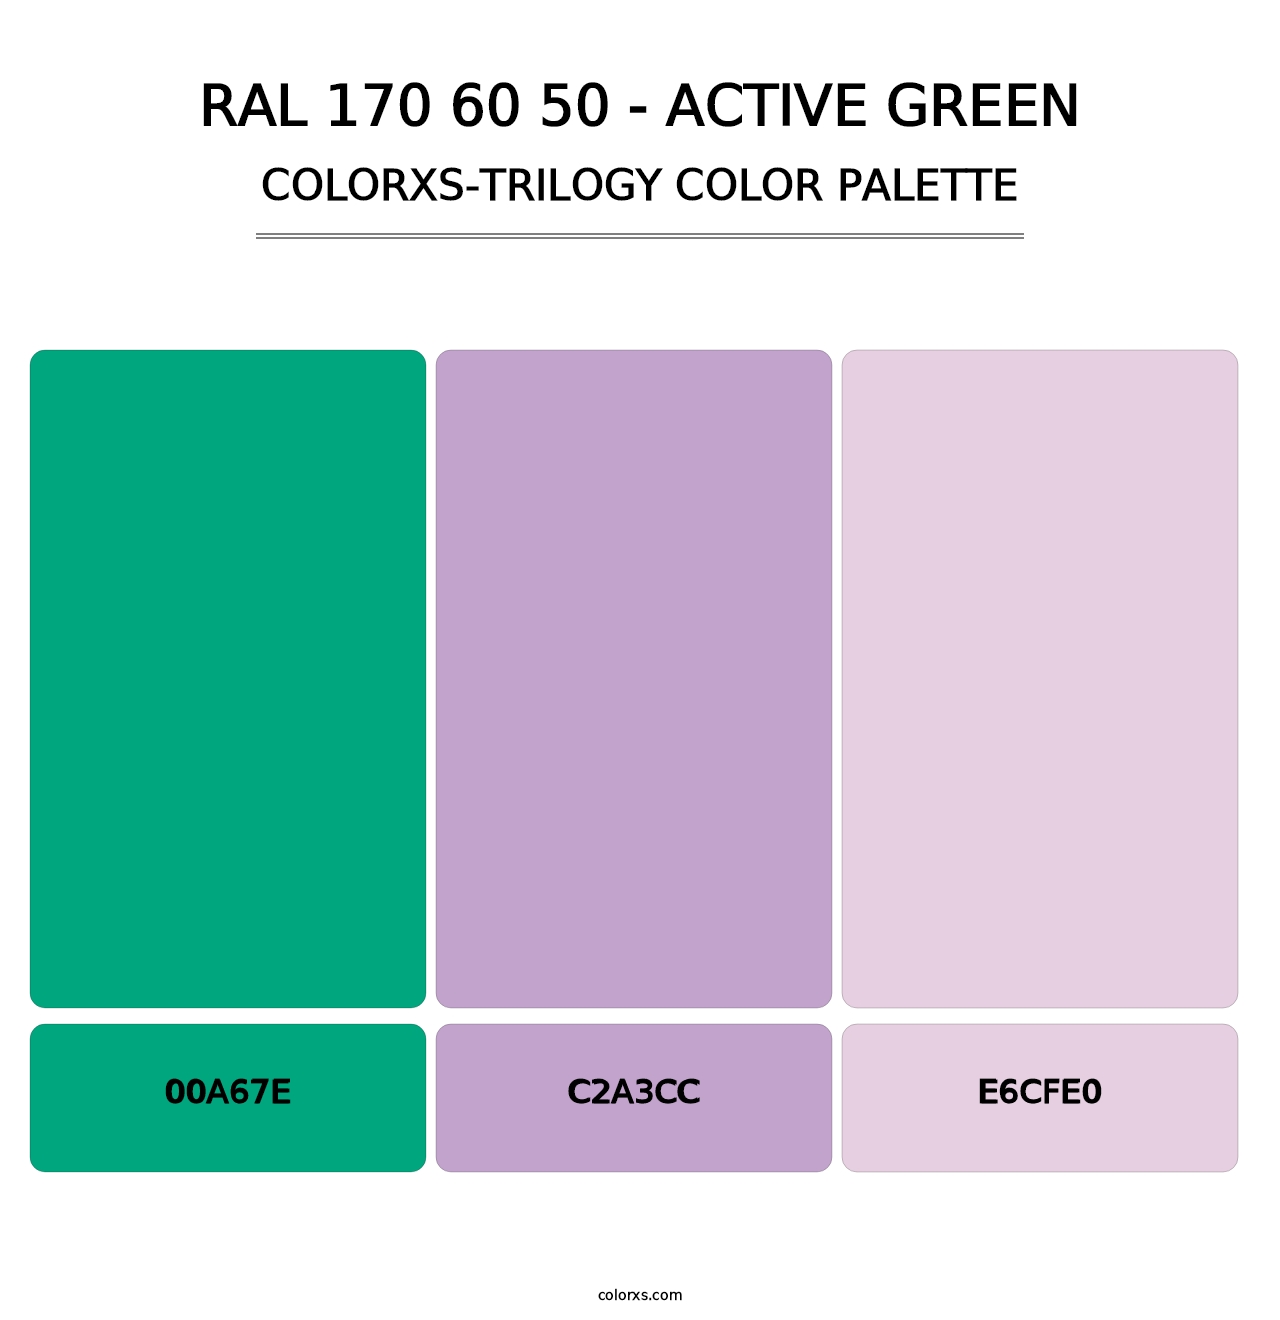 RAL 170 60 50 - Active Green - Colorxs Trilogy Palette